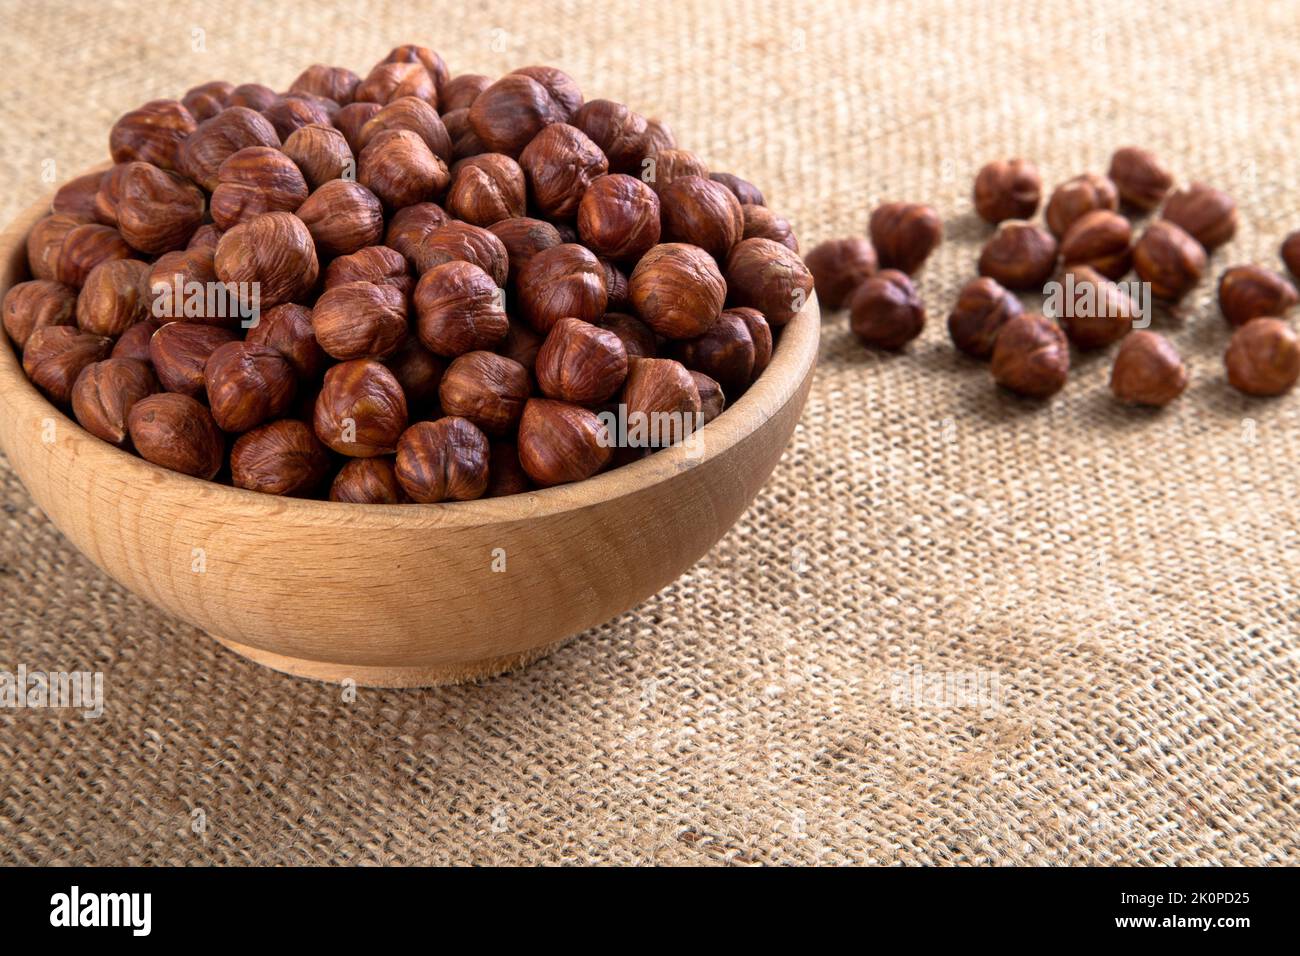 Top view of a bowl full of hazelnuts Stock Photo